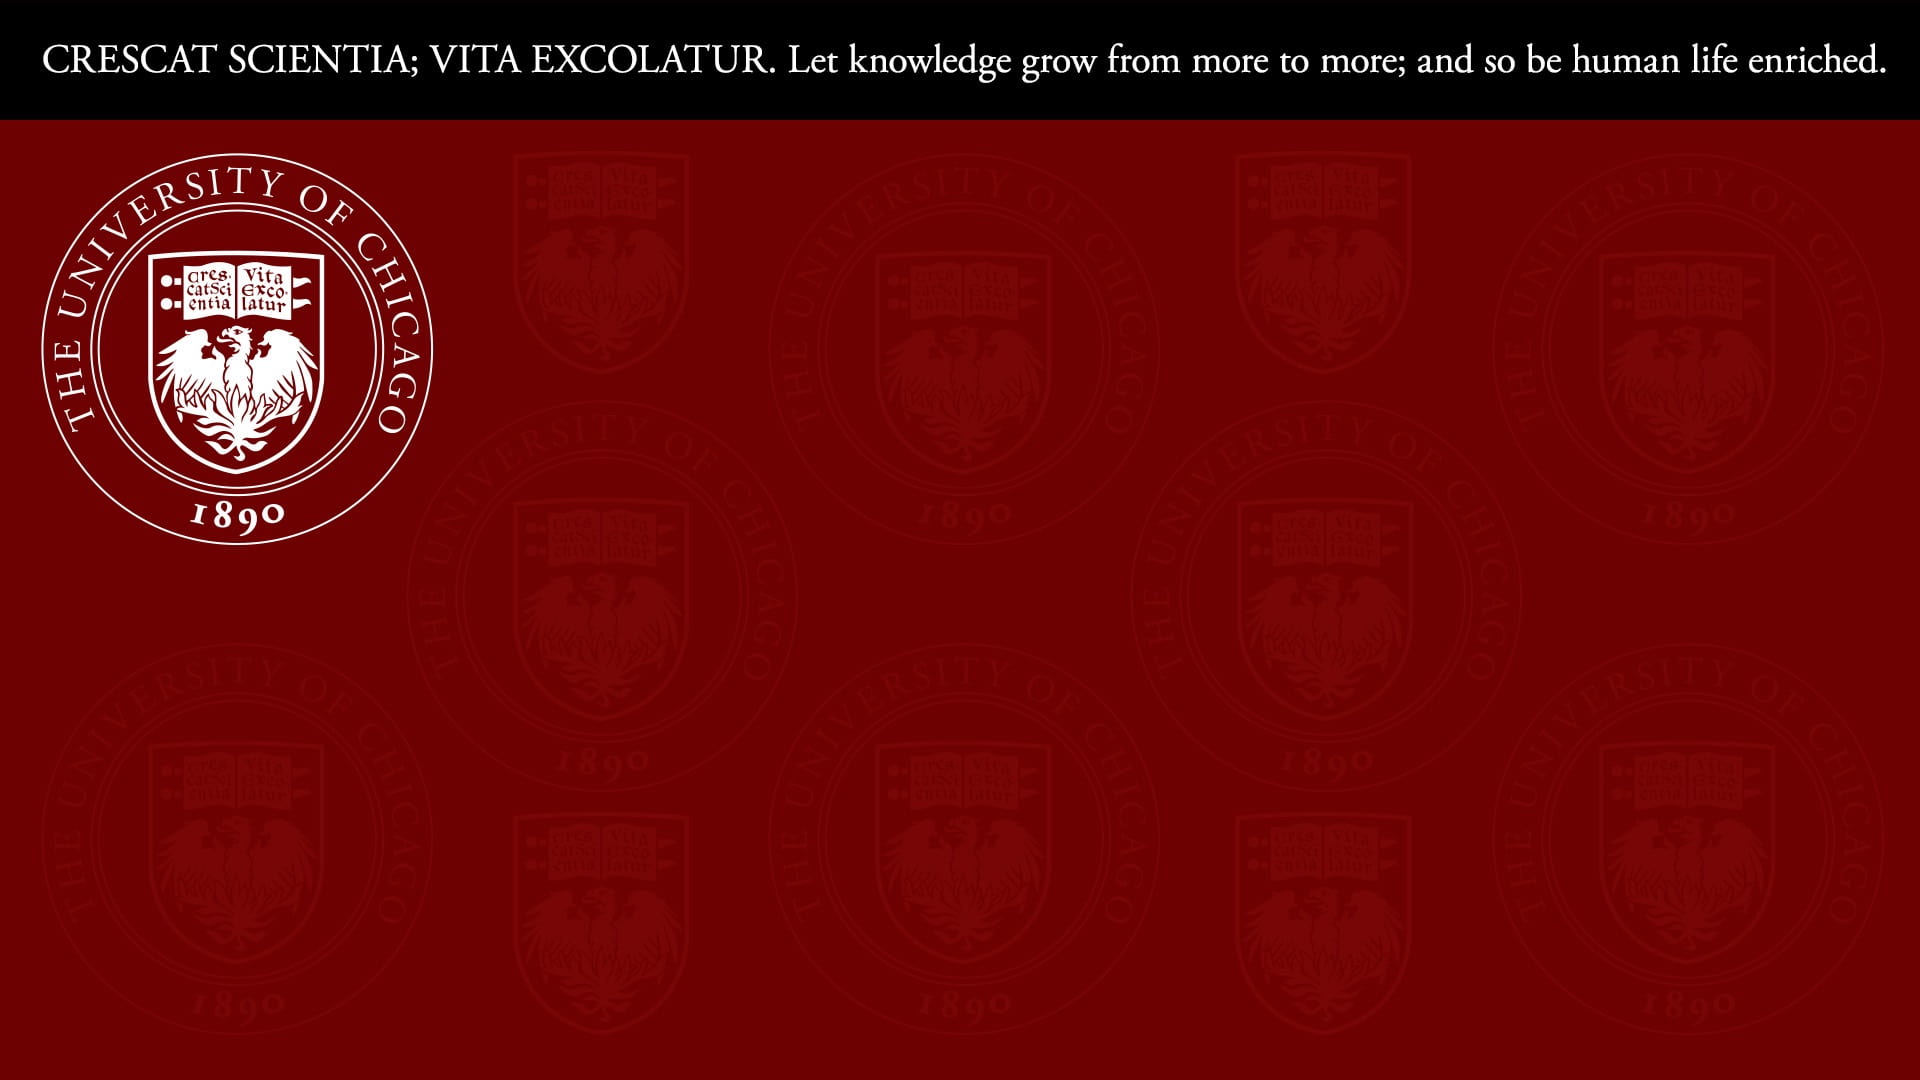 White University Seal on a maroon background with the school motto at the top in a black bar: Let knowledge grow from more to more; and so be human life enriched